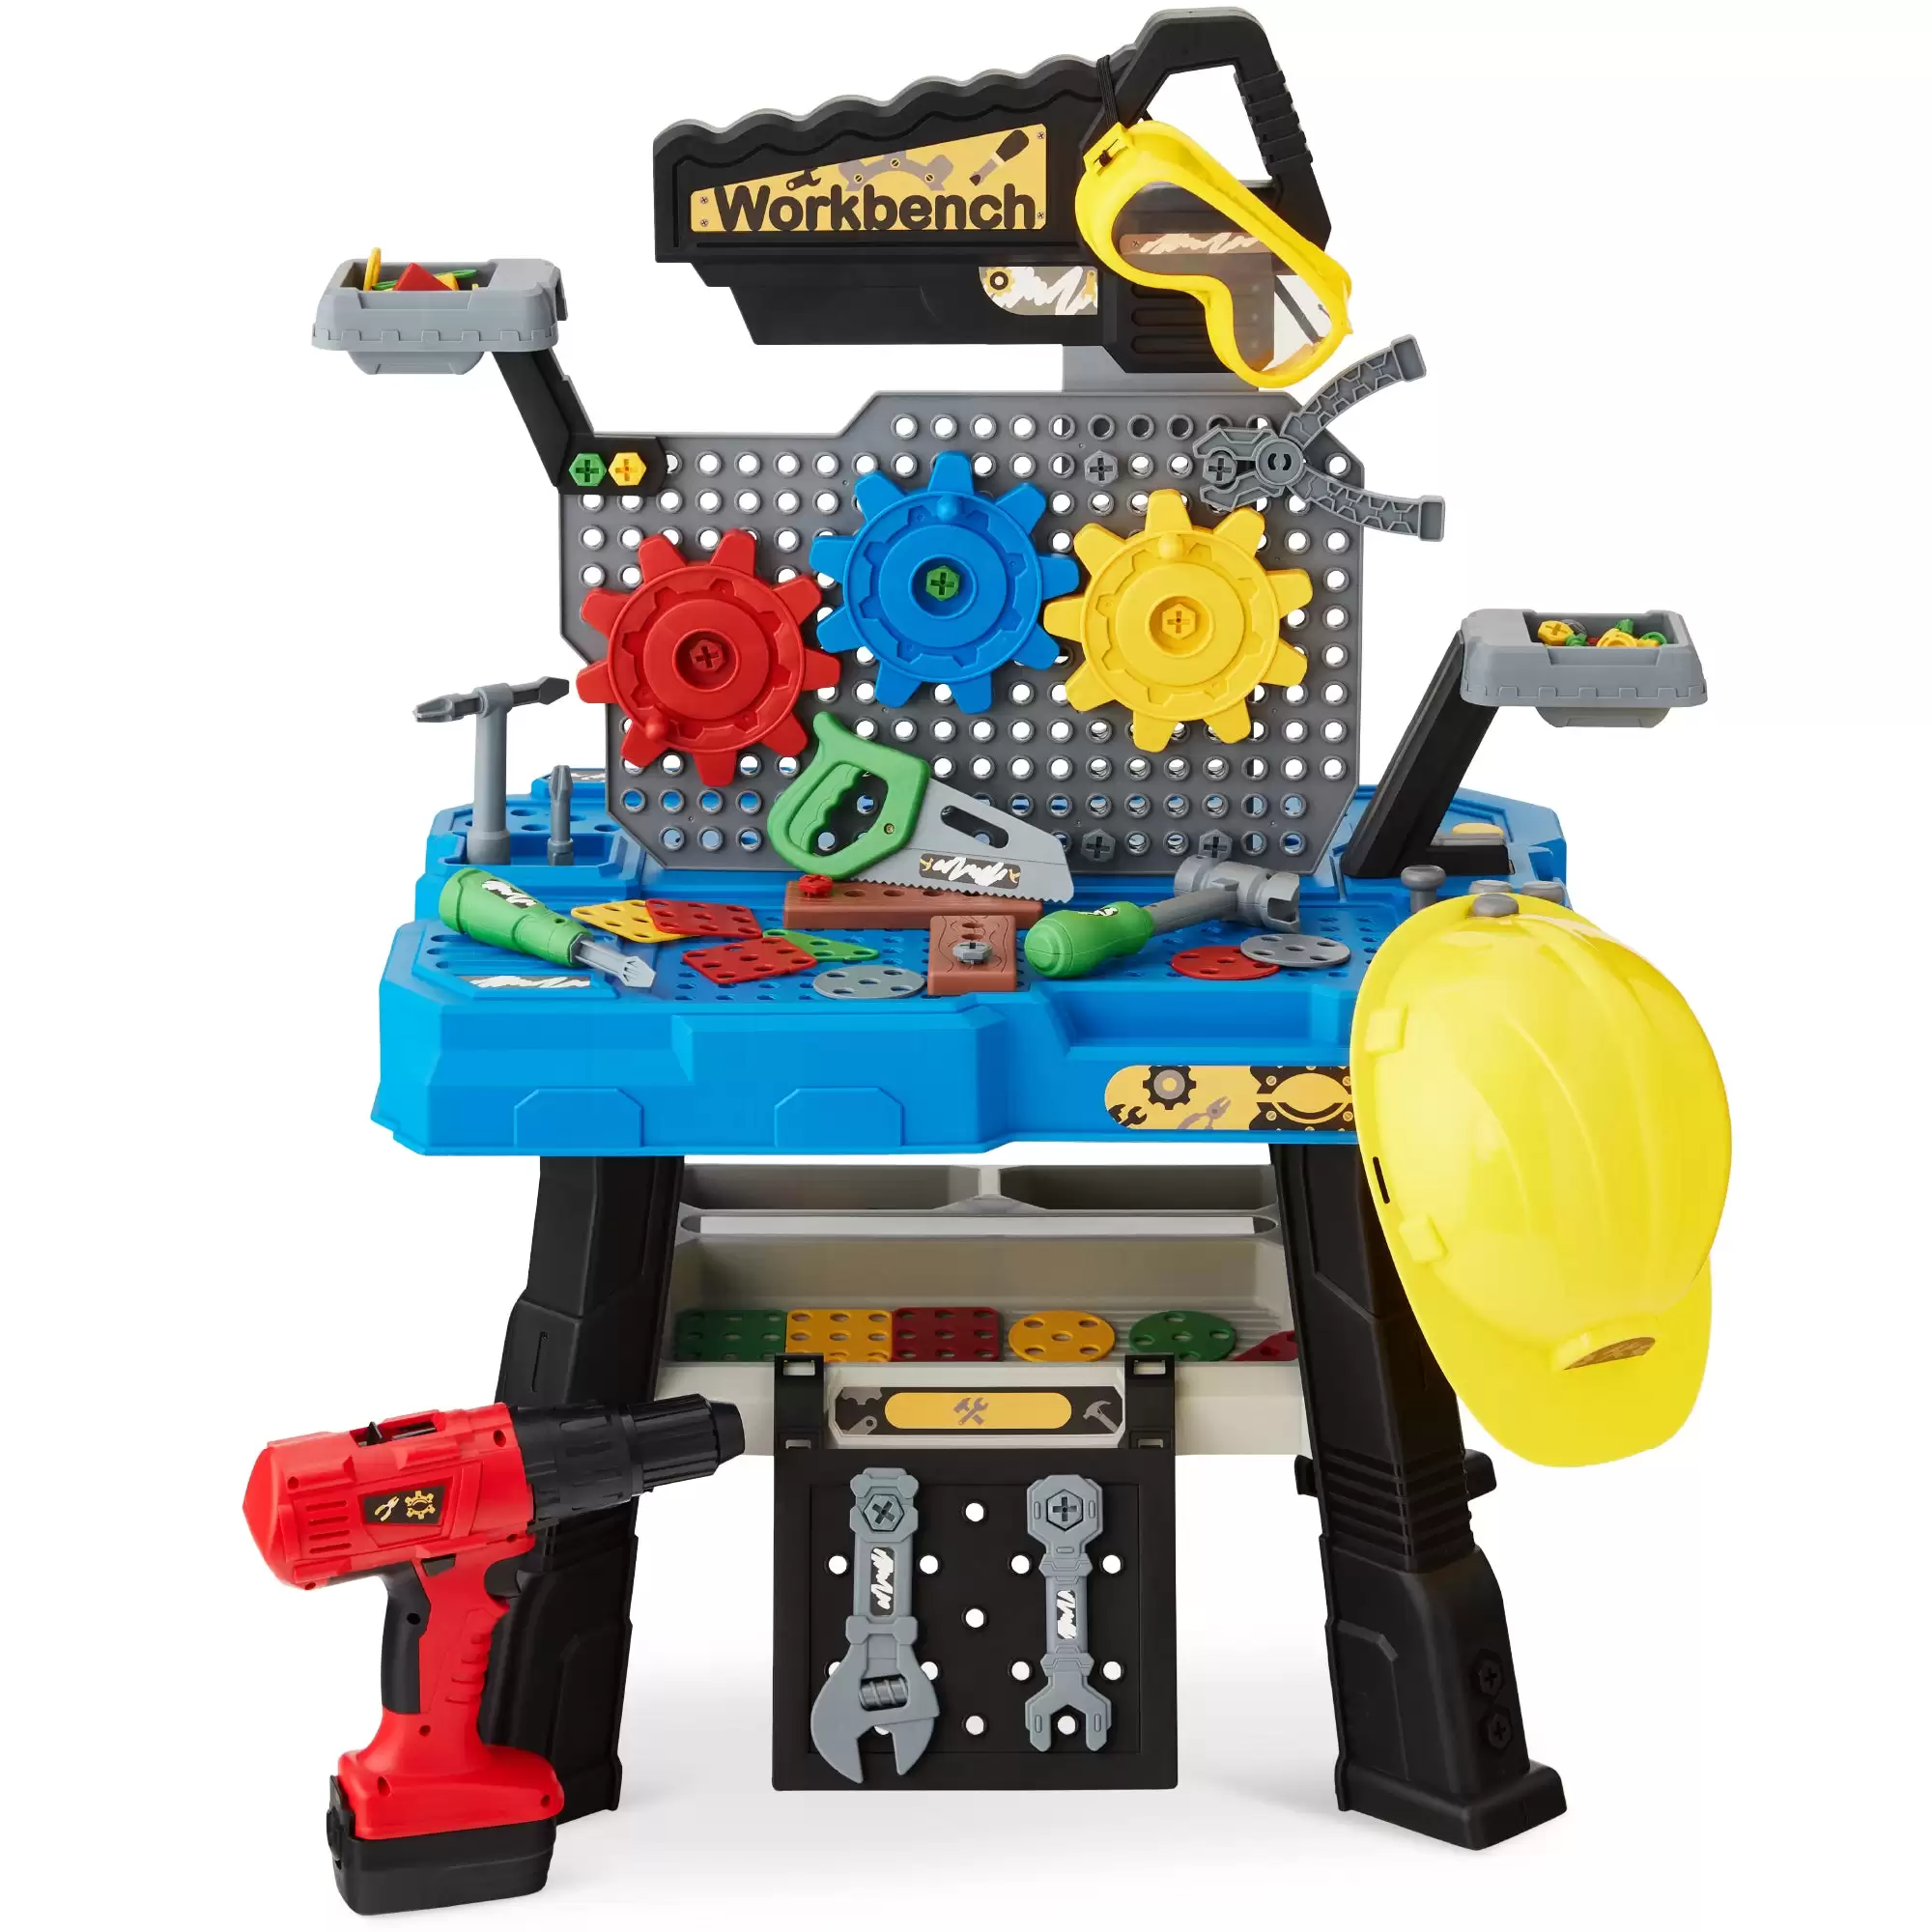 Pay $29.74 Pretend Play Workbench For Kids, Child's Toy Set W/ 150 Accessories At Bestchoiceproducts